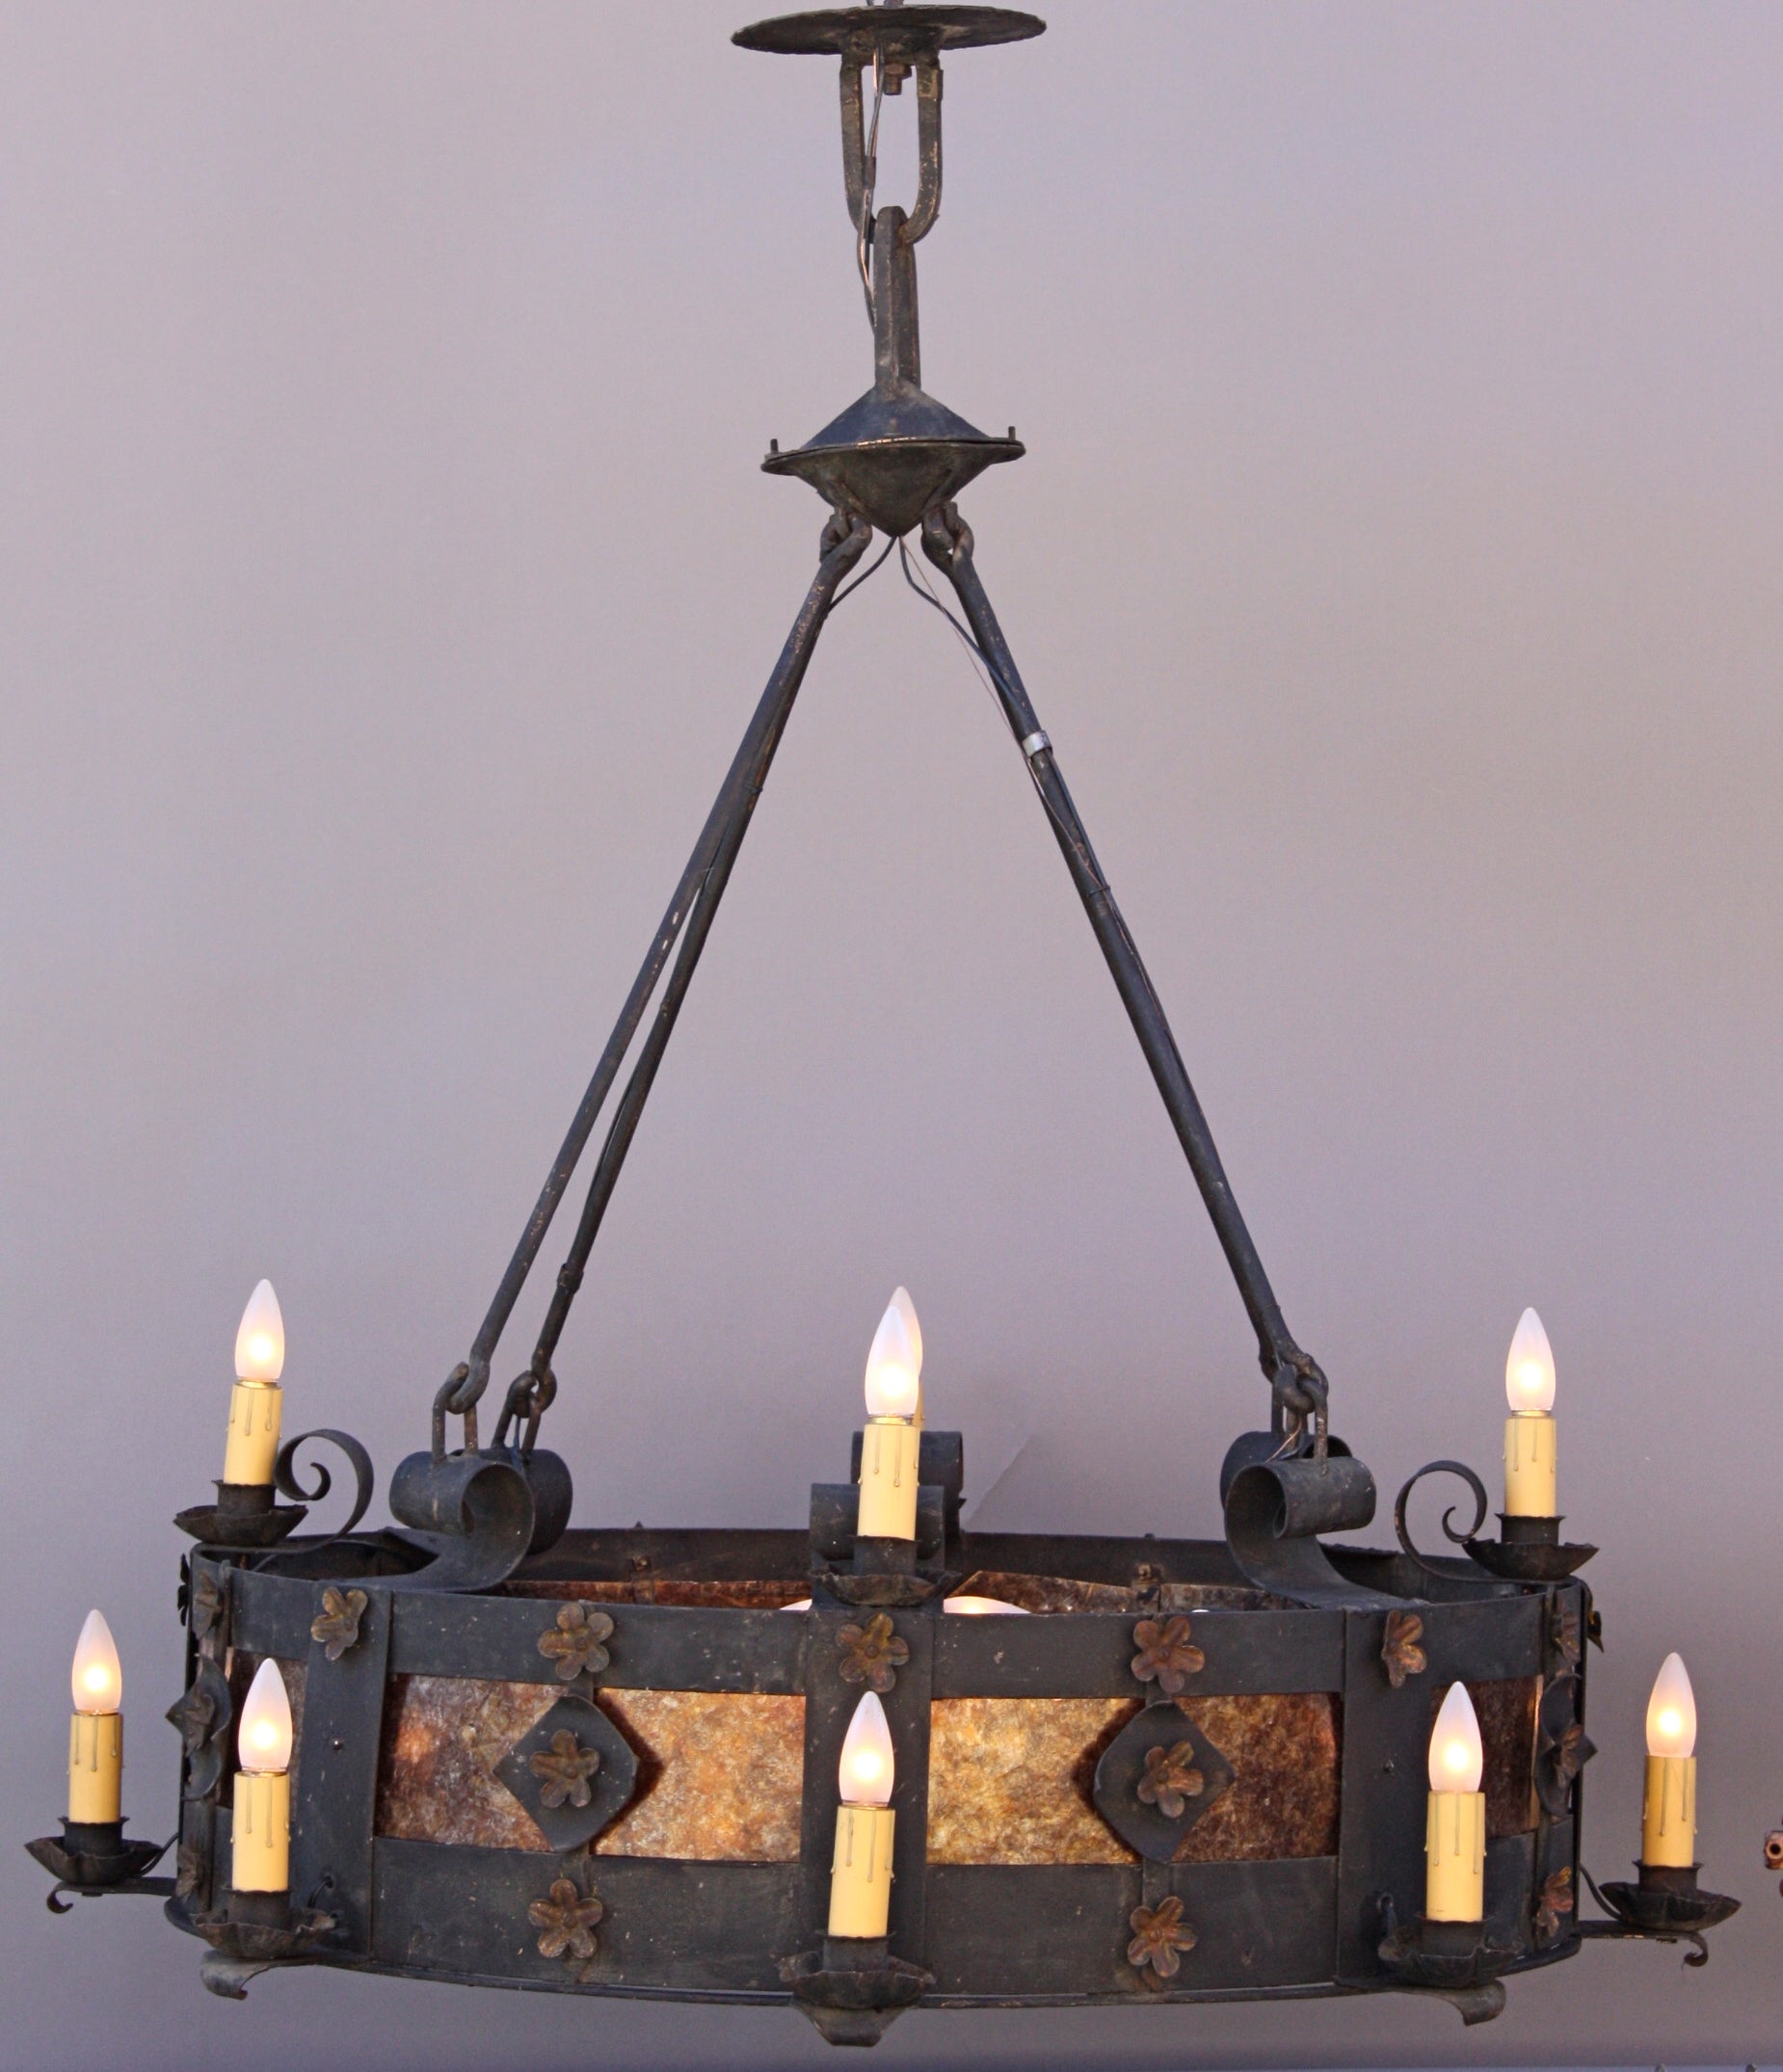 Large-Scale Wrought Iron & Mica Chandelier